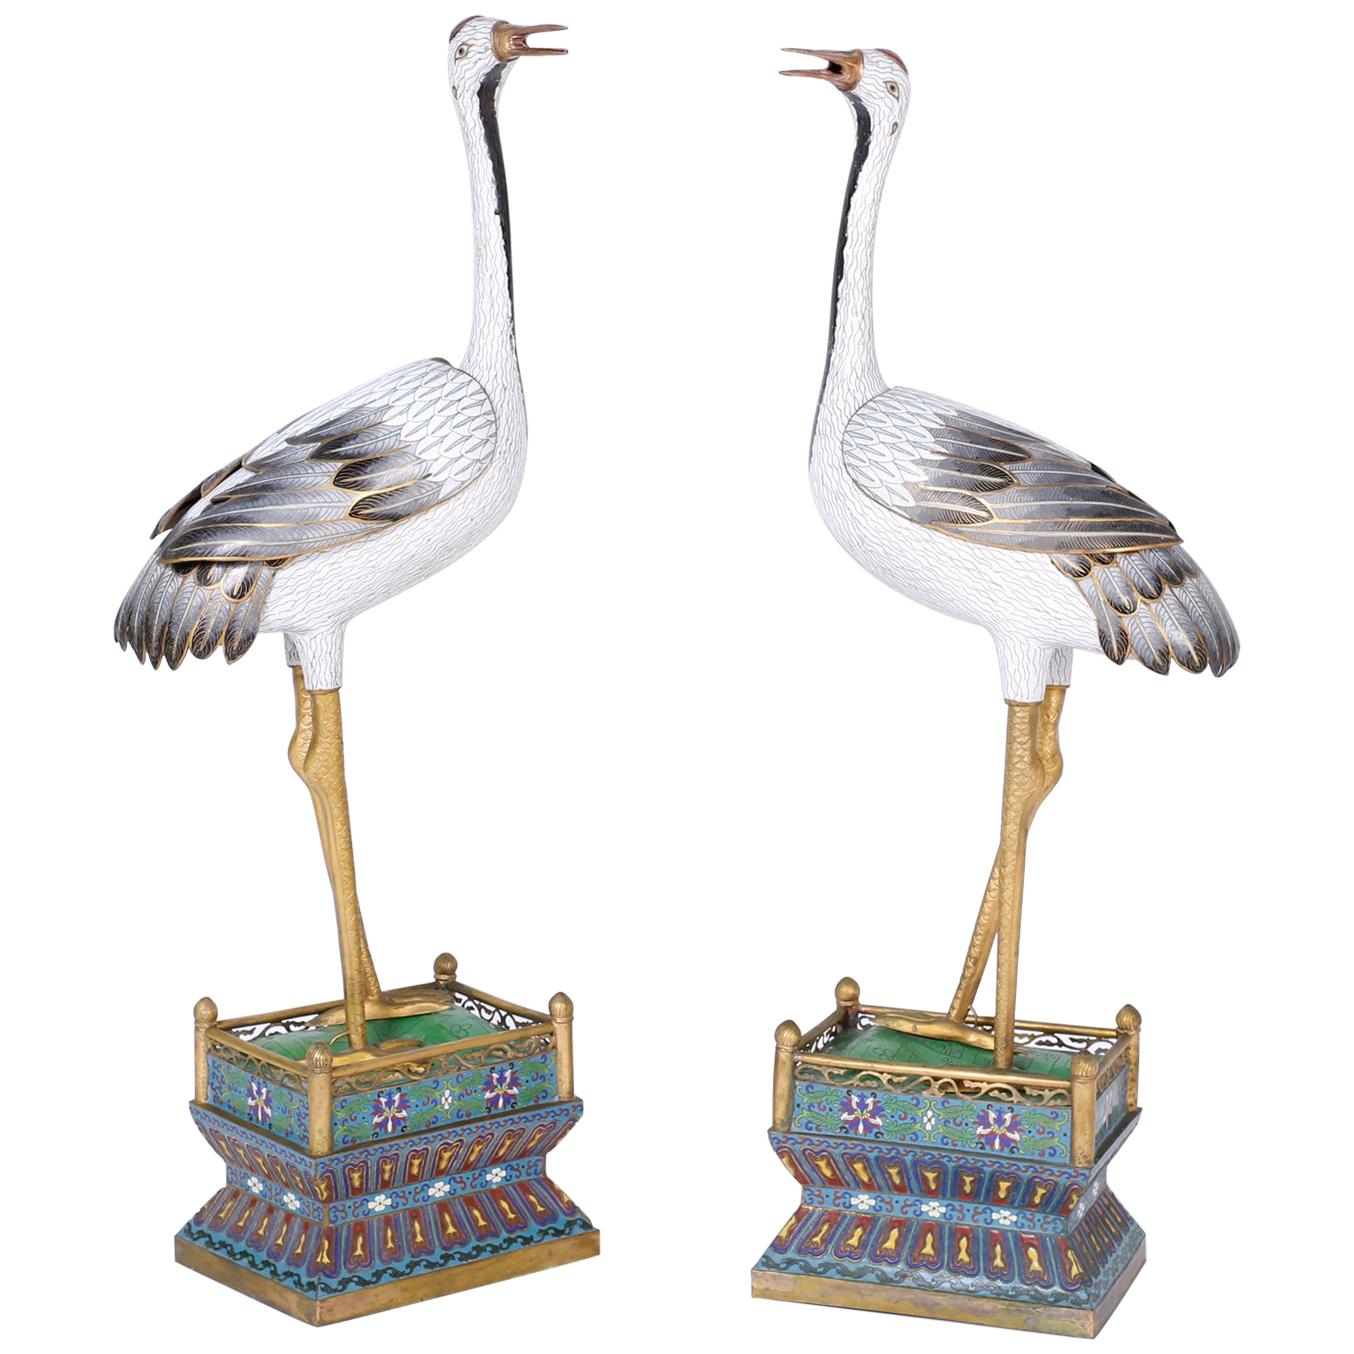 Large Pair of Chinese Cloisonne Cranes or Birds